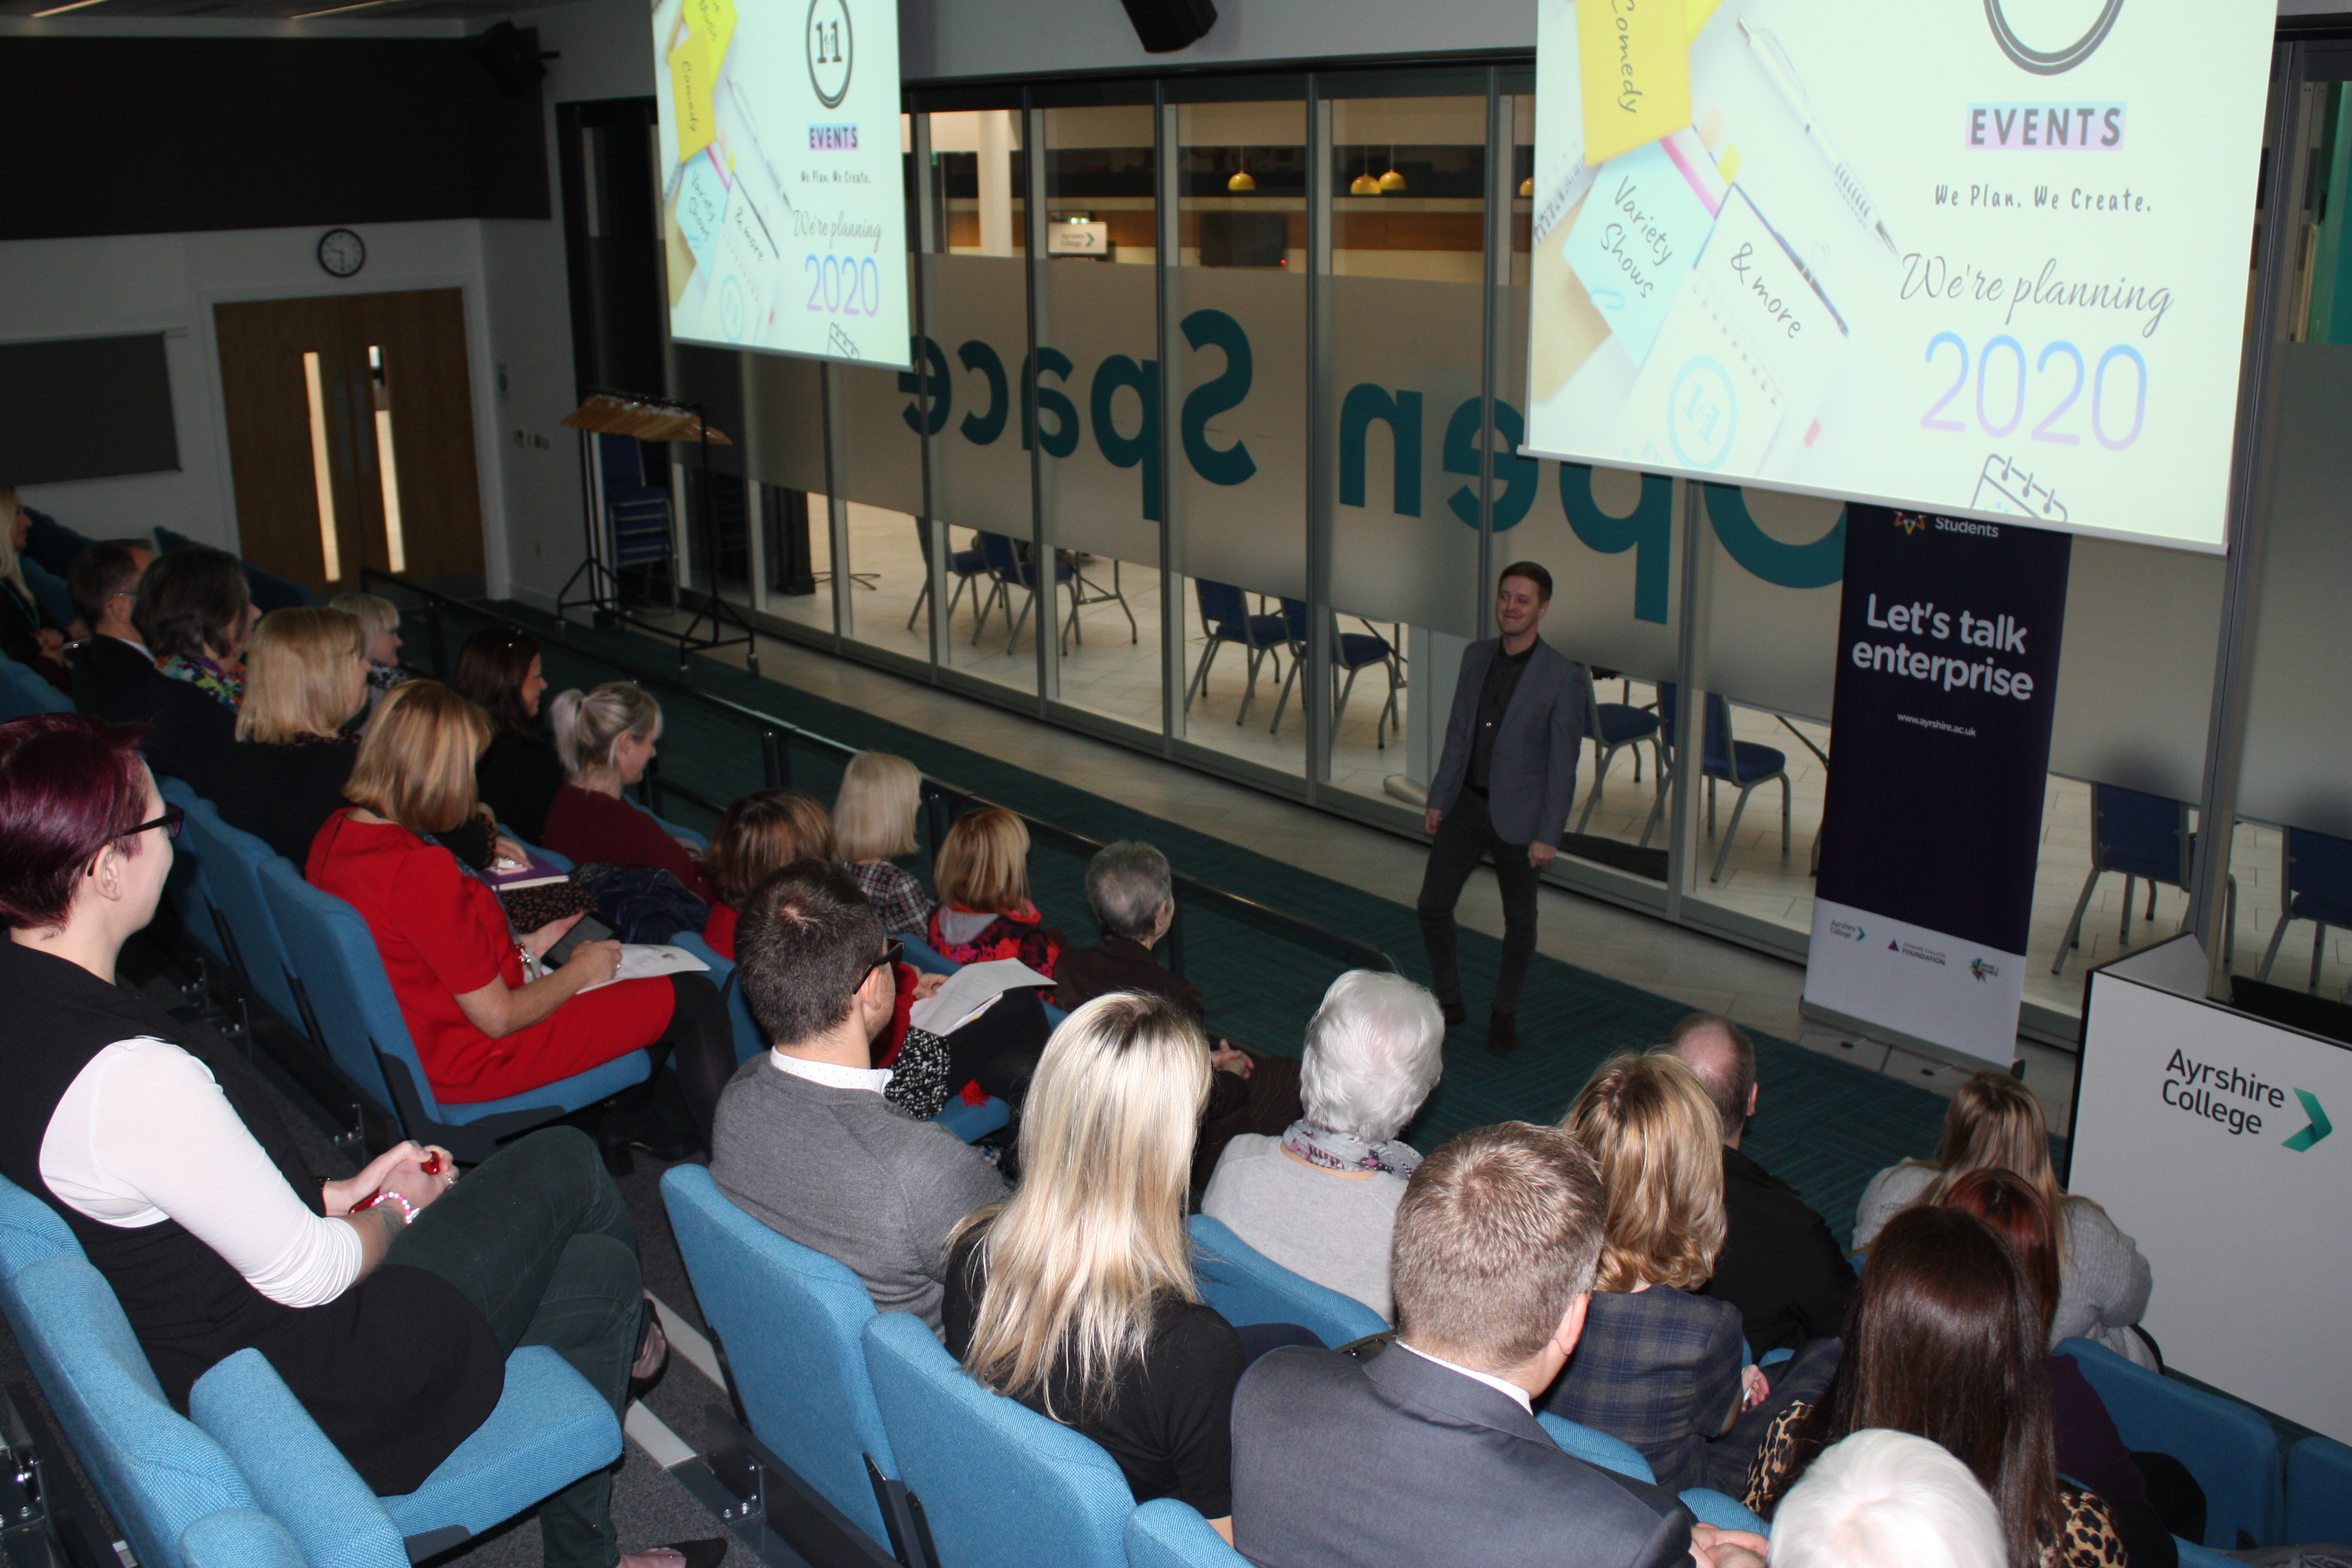 Ayrshire College celebrates the second year of Enterprising students